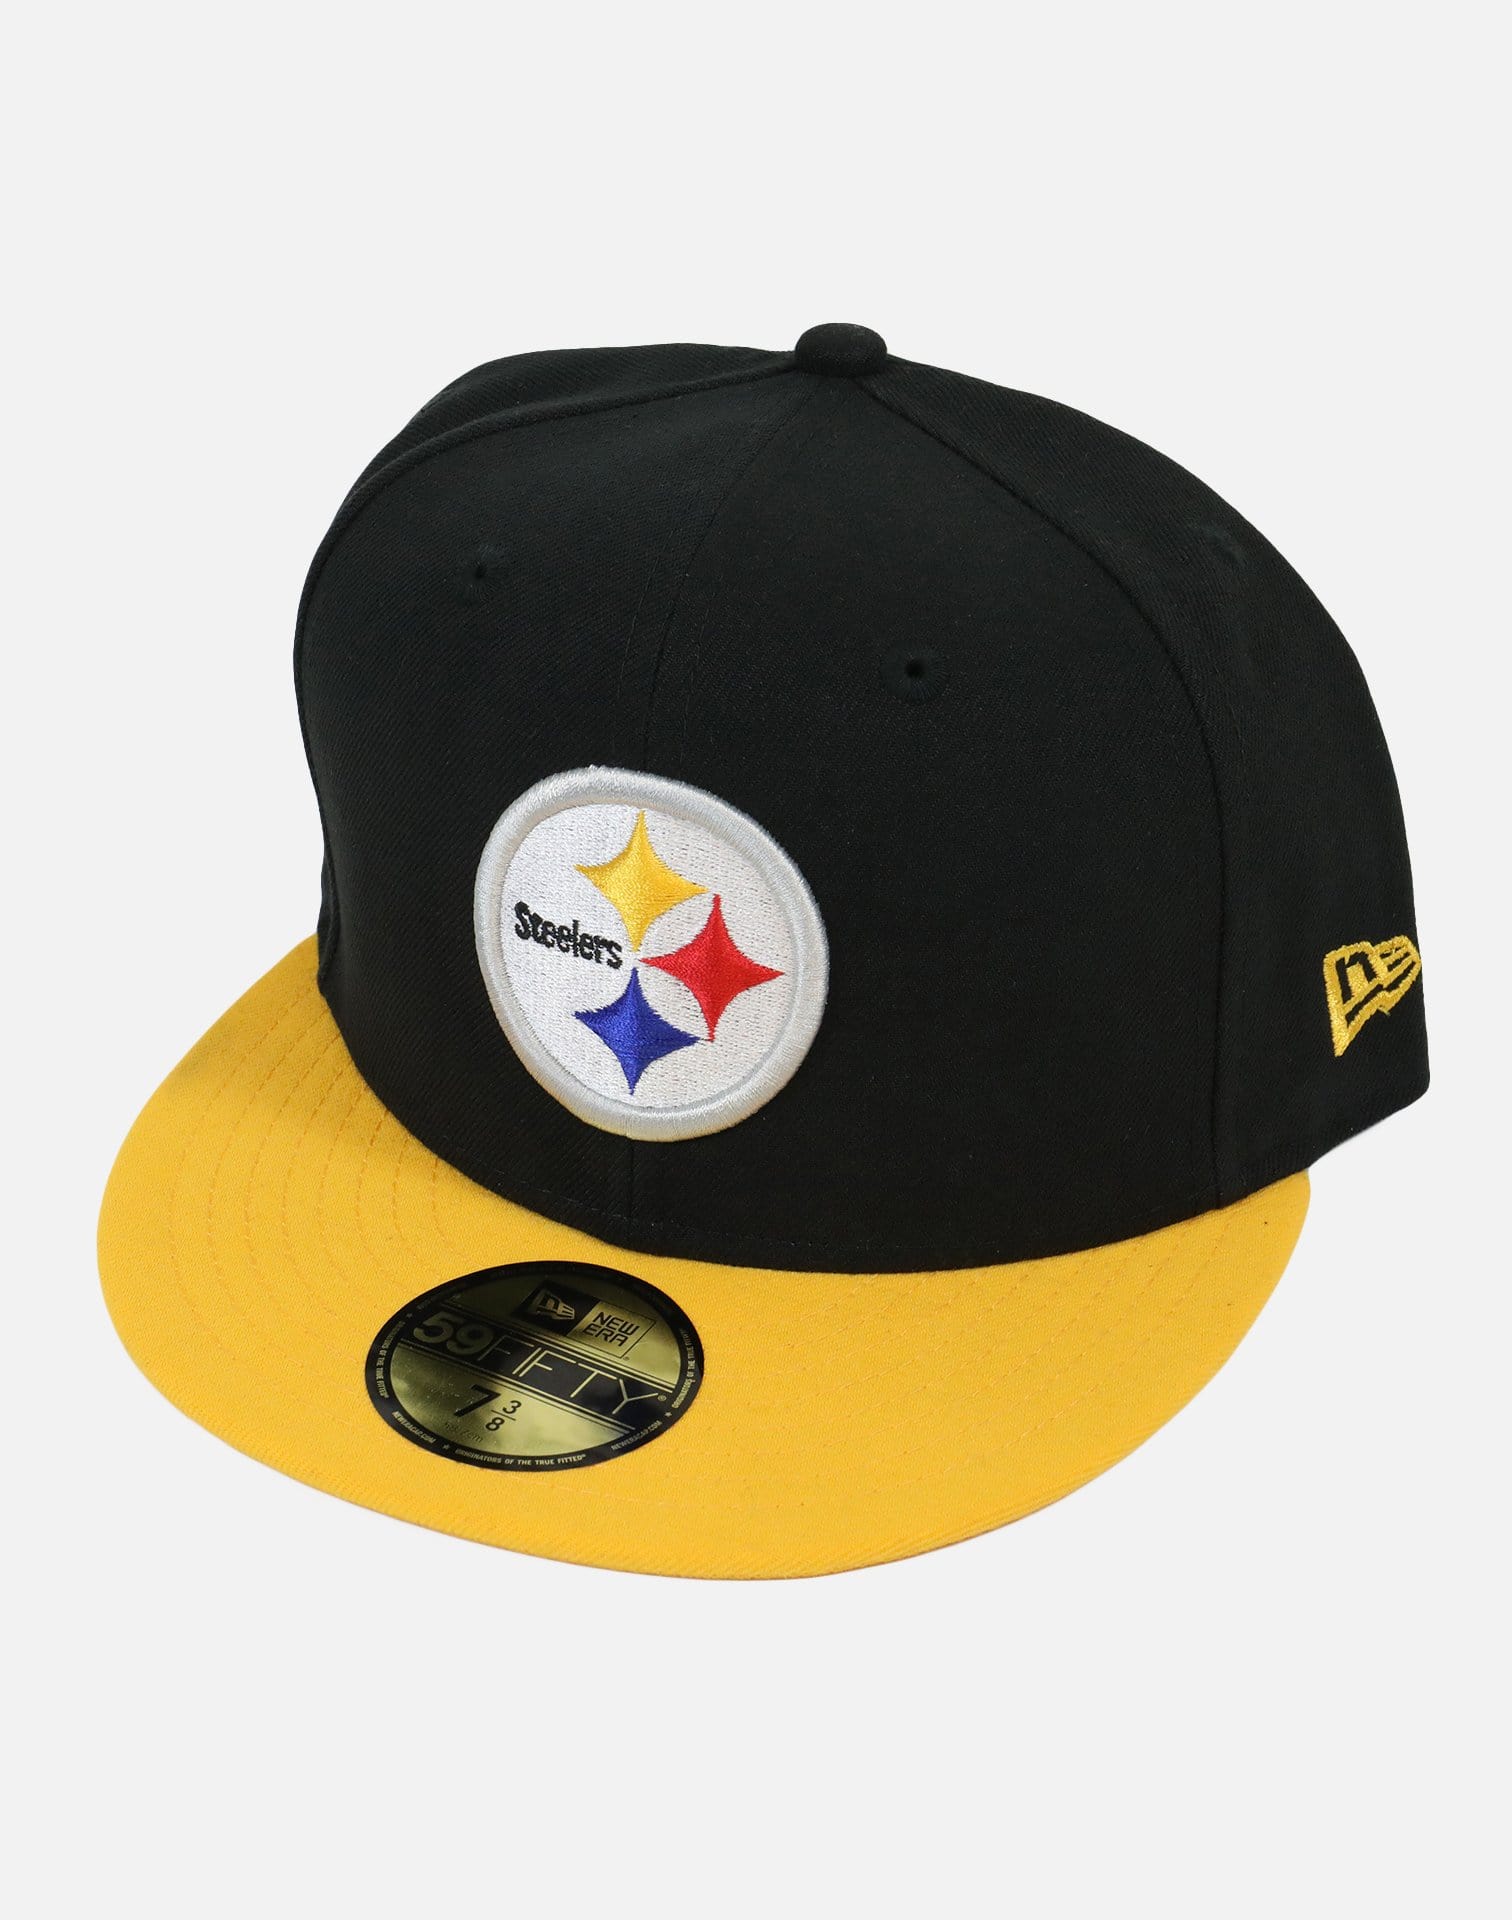 New Era Pittsburgh Steelers Authentic Fitted Hat (Black/Yellow)